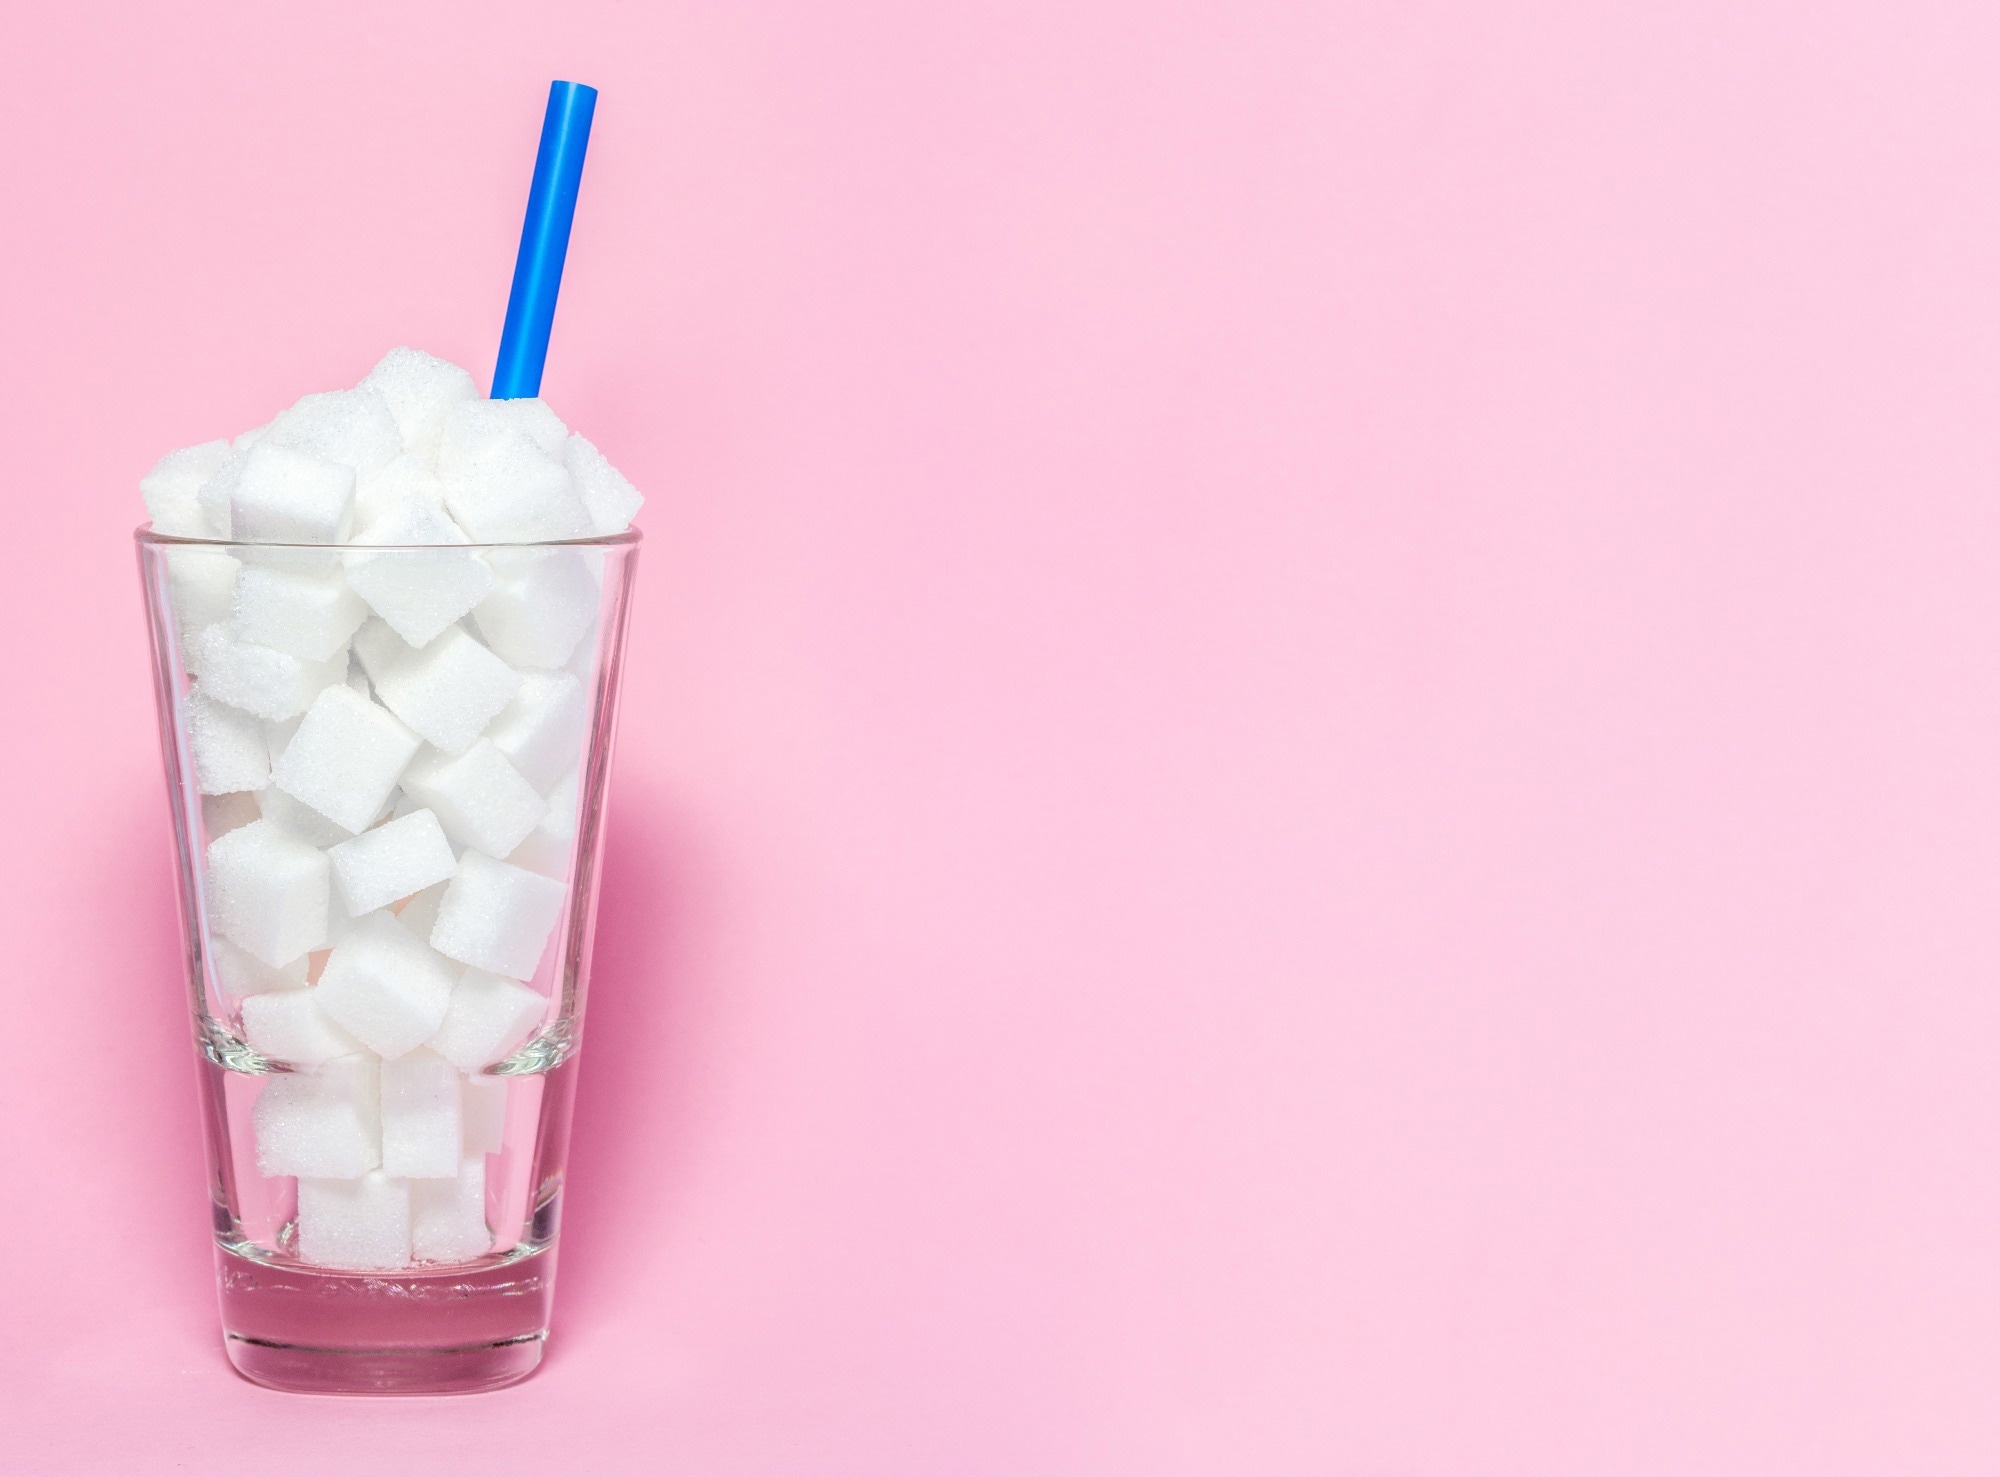 Study: Sugar-sweetened beverage intakes among adults between 1990 and 2018 in 185 countries. Image Credit: Alexander Weickart/Shutterstock.com